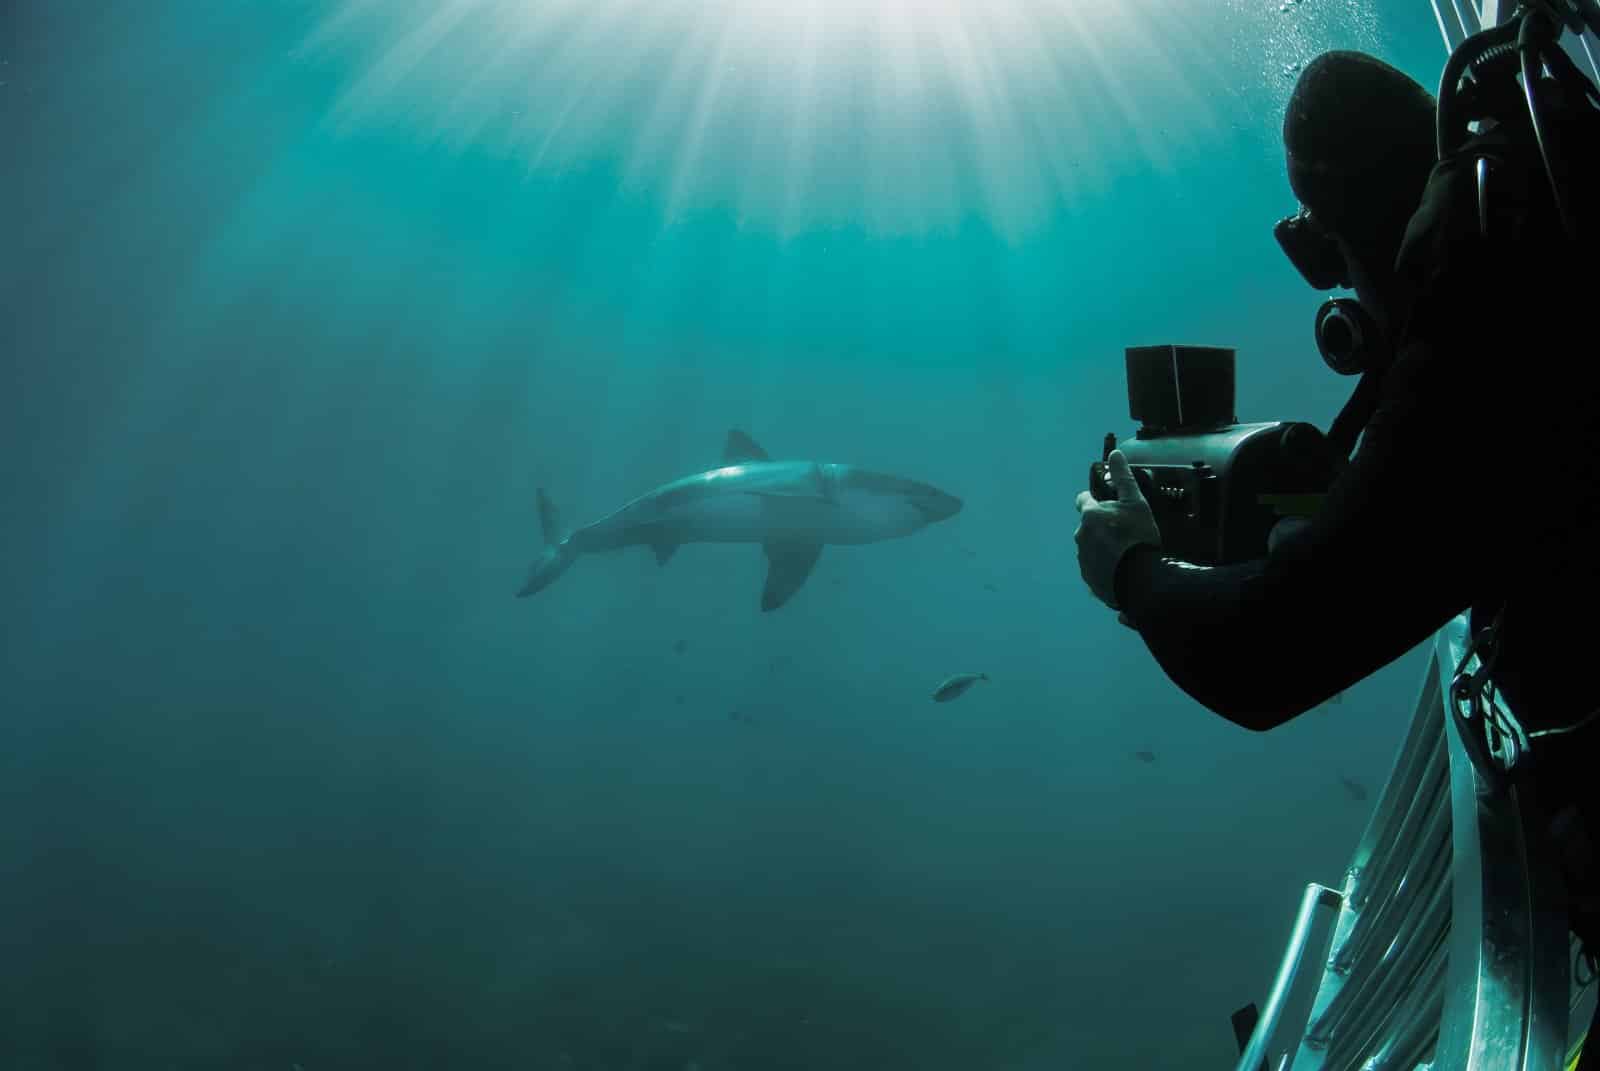 <p class="wp-caption-text">Image Credit: Shutterstock / Fiona Ayerst</p>  <p>Face your fears and come face to face with one of the ocean’s most formidable predators on a shark cage diving expedition in Gansbaai, South Africa. Descend into the depths of the icy Atlantic waters and witness the raw power and majesty of great white sharks in their natural habitat.</p>